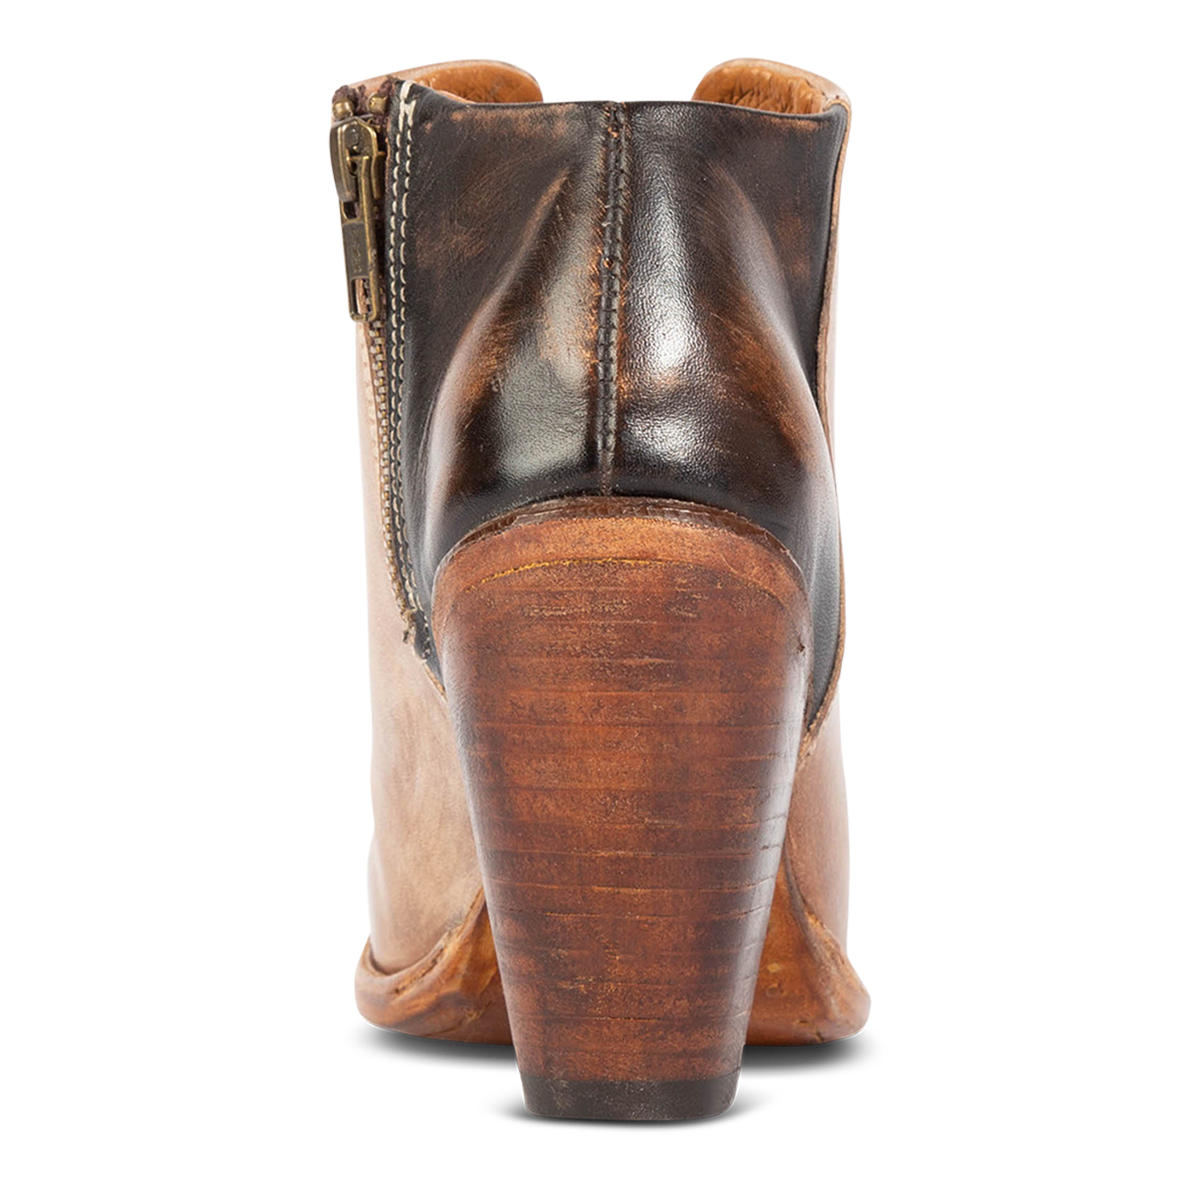 Back view showing inverted wooden heel on FREEBIRD women's Detroit taupe bootie